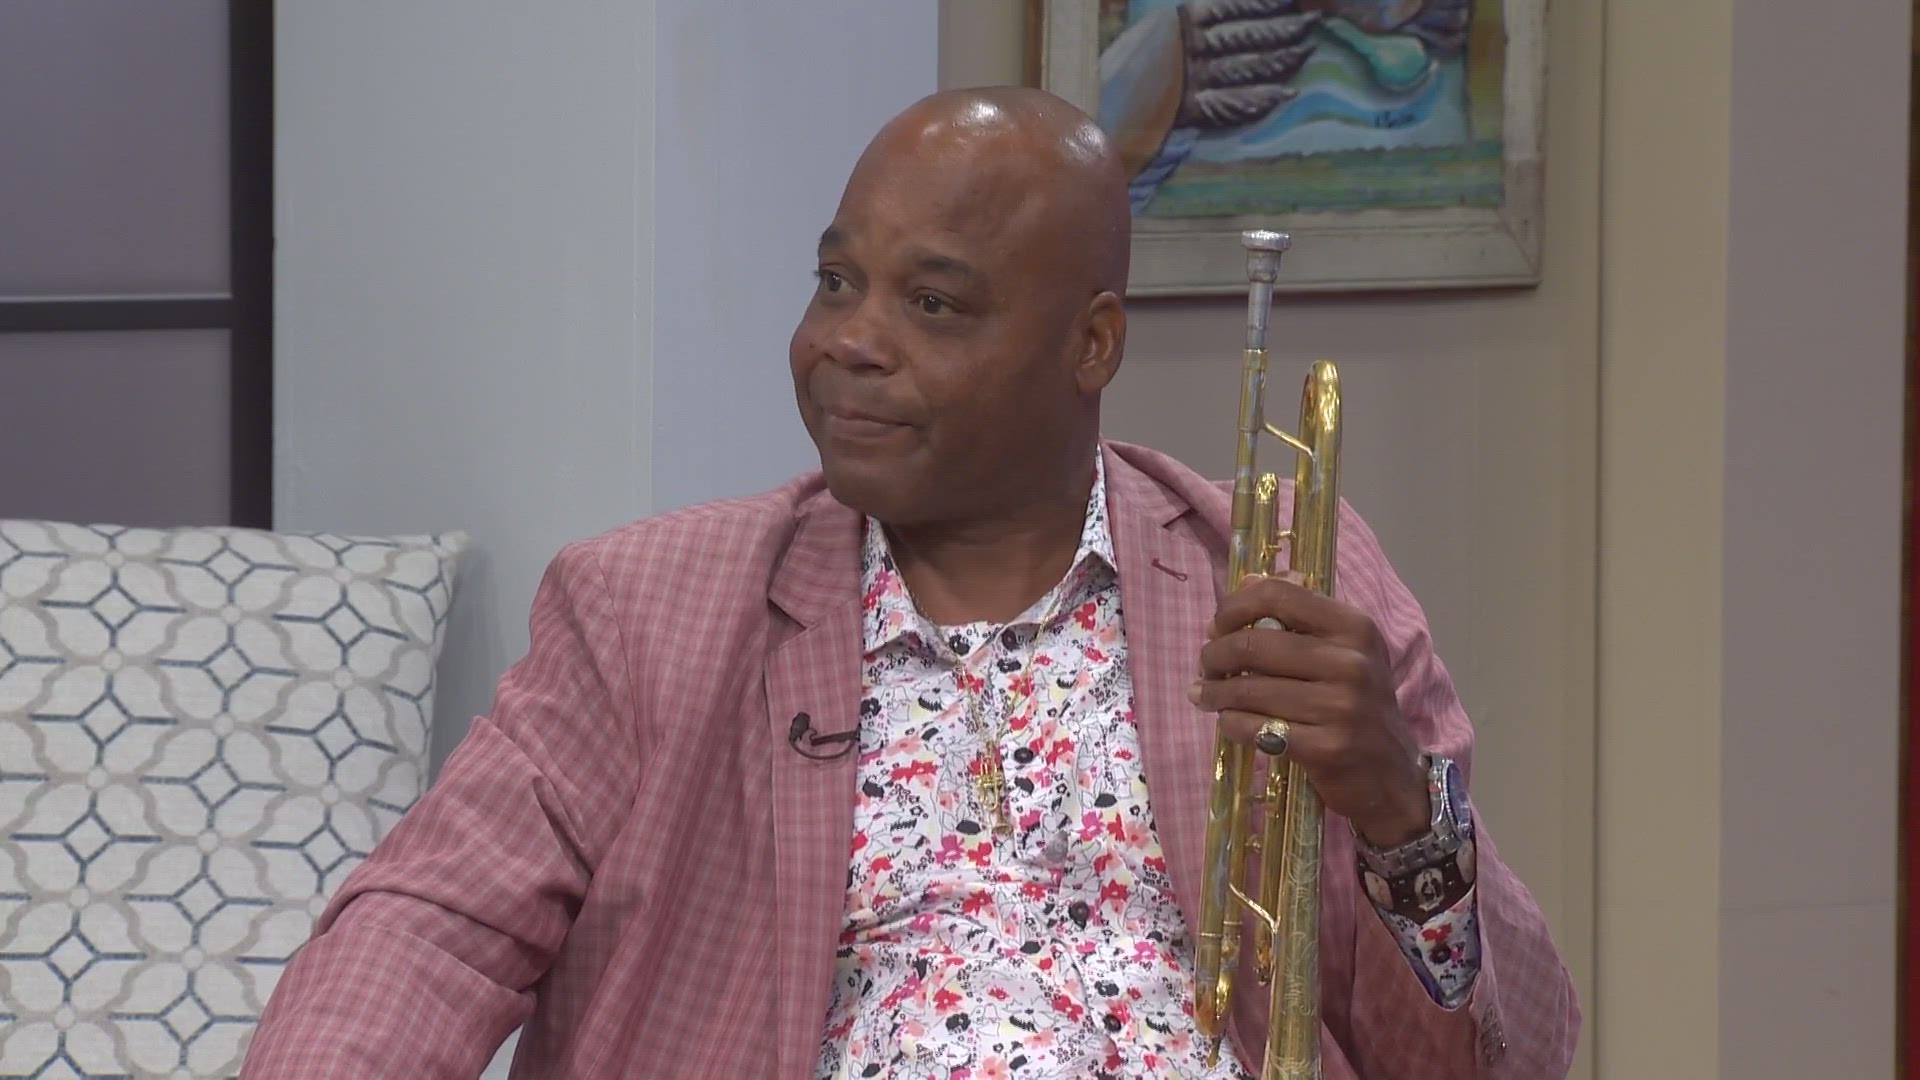 James Andrews joins WWLTV to perform ahead of the “Under the Bridge Memorial Day Weekend” event.